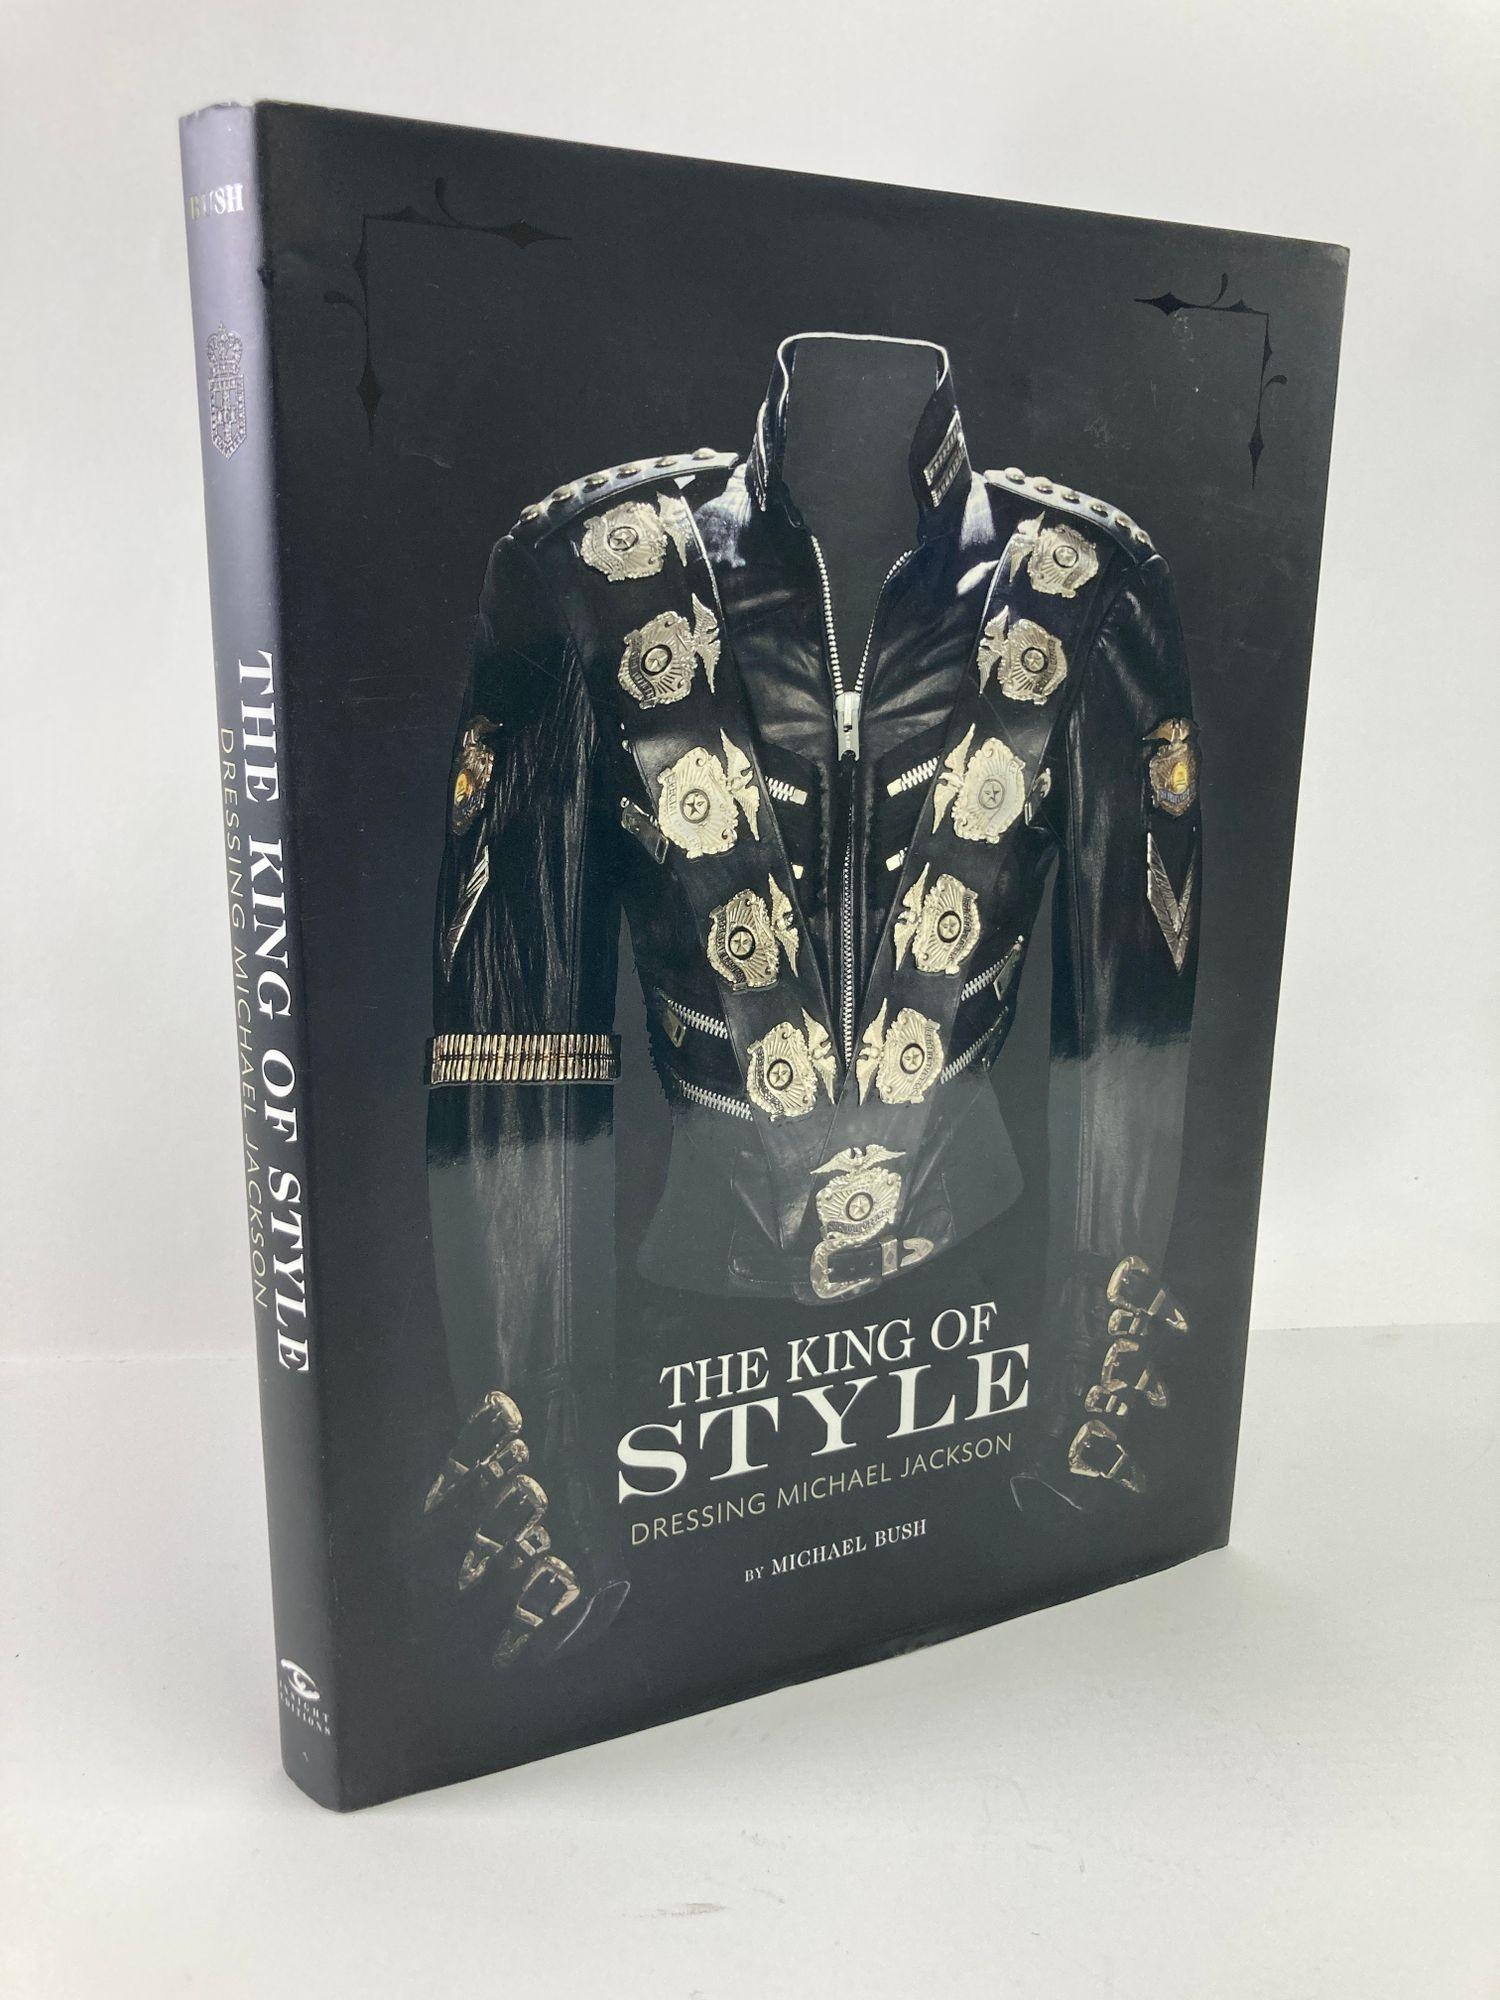 The King of Style: Dressing Michael Jackson by Michael Bush hardcover large coffee table book.
The King of Style: Dressing Michael Jackson is a fascinating look at the intersection of music and fashion, as well as an homage to Michael Jackson’s